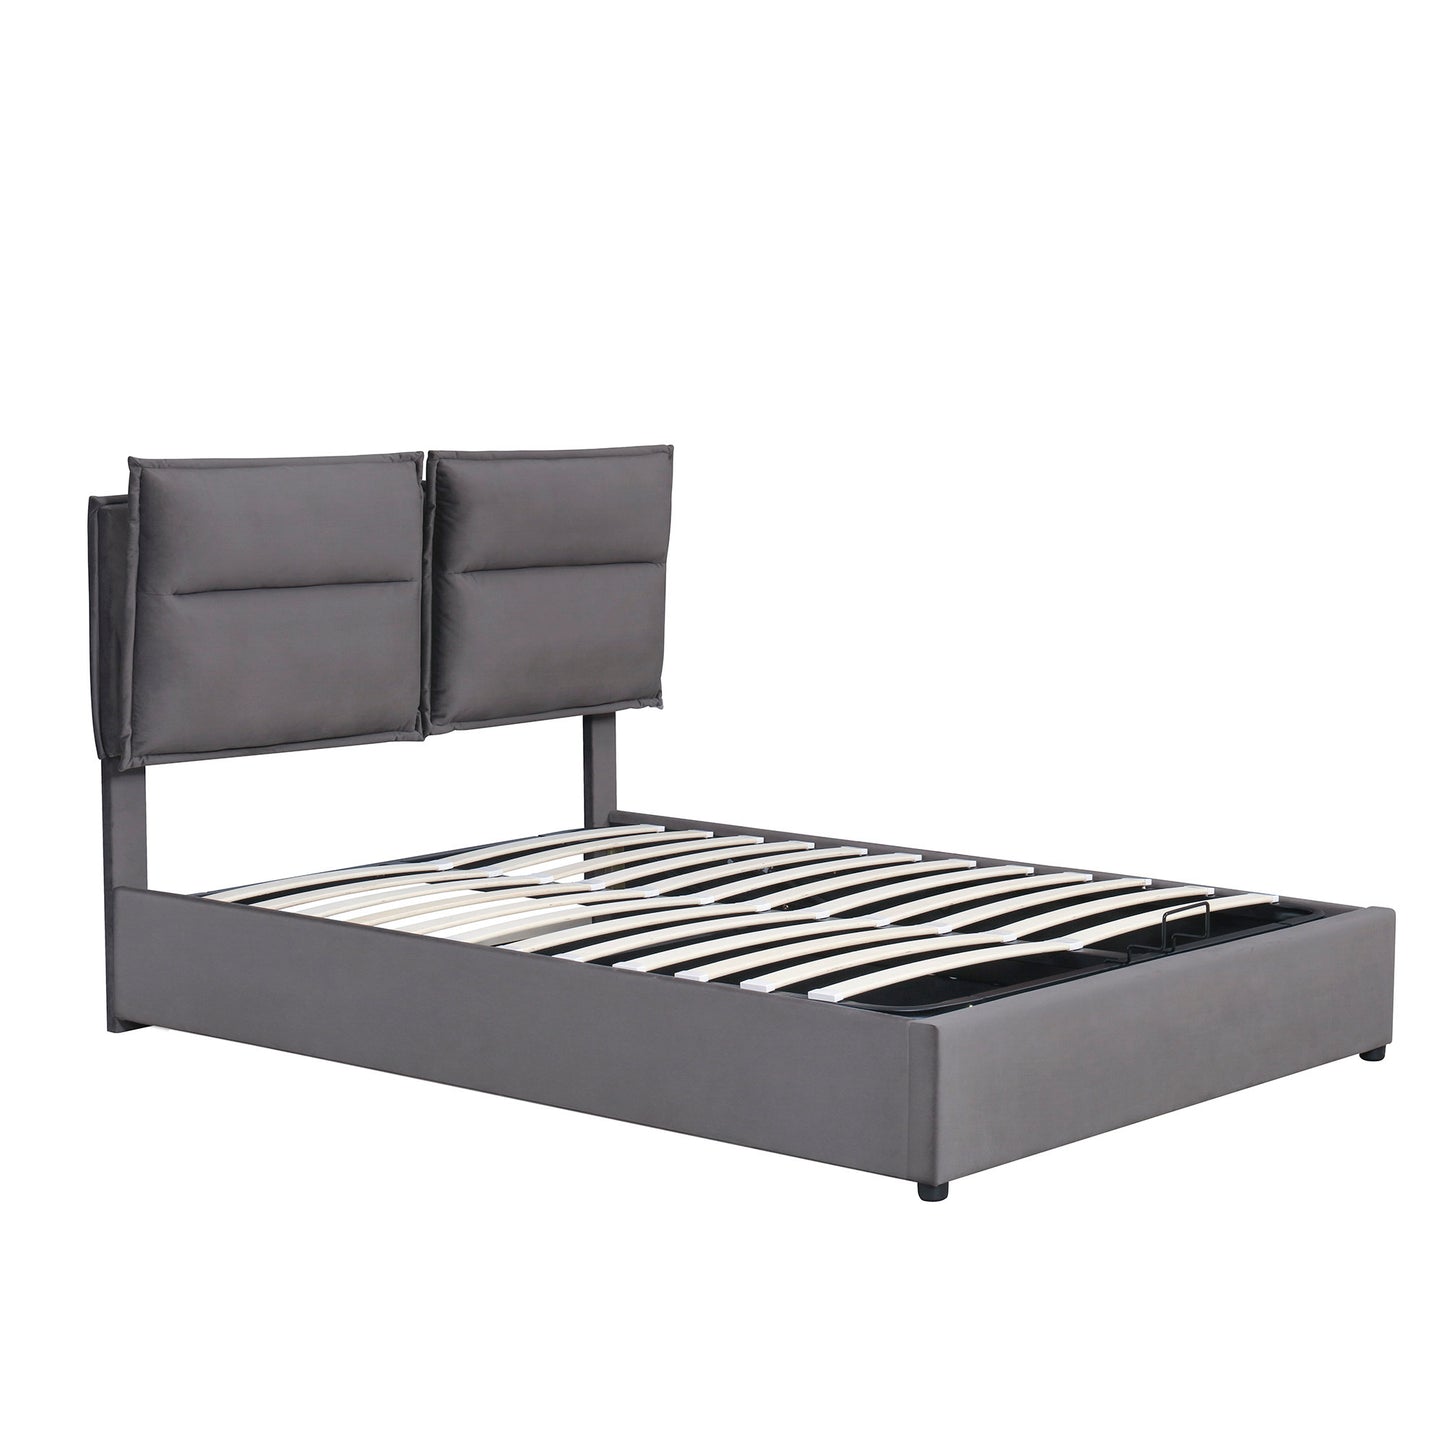 Upholstered Platform bed with a Hydraulic Storage System, Queen size, Gray